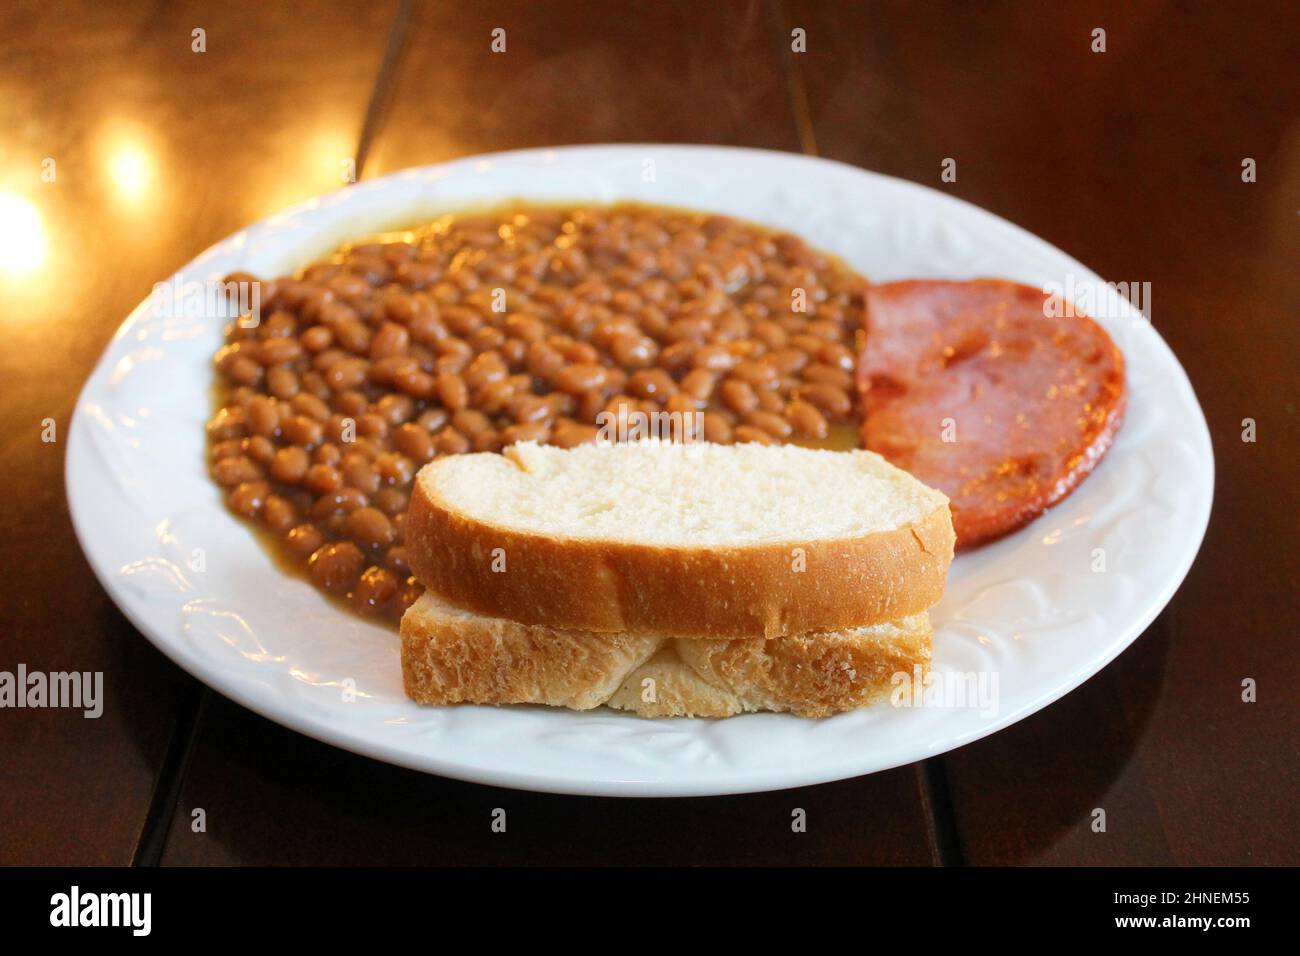 Close-up of a plate of baked beans with ham and a slice of bread. Stock Photo